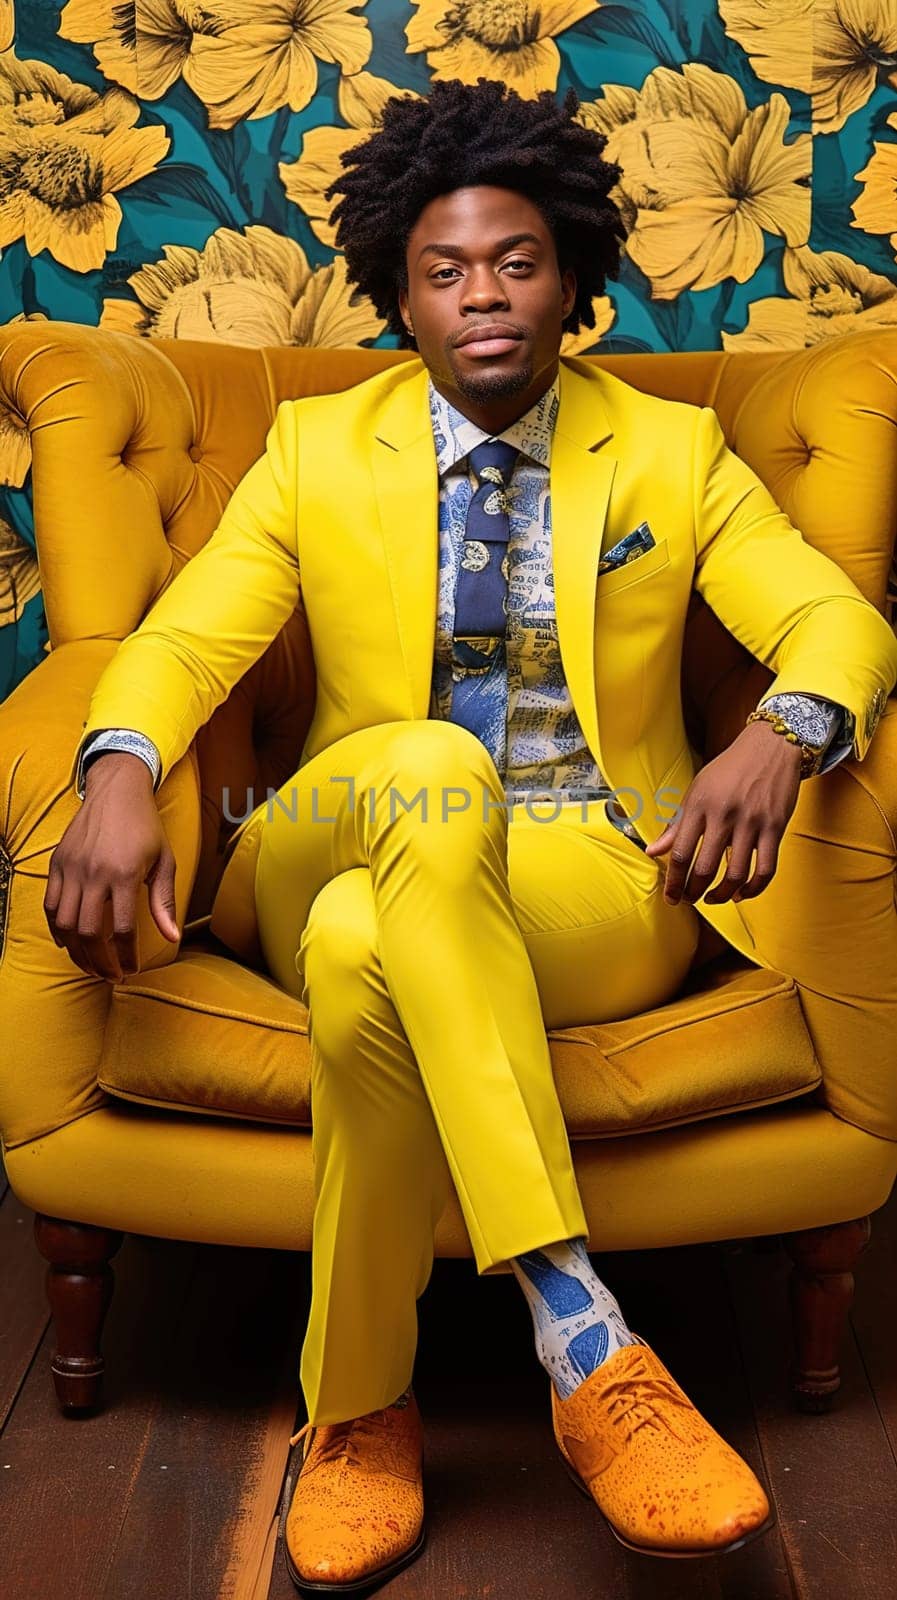 Stylish African-American man in a luxurious yellow suit. by Yurich32